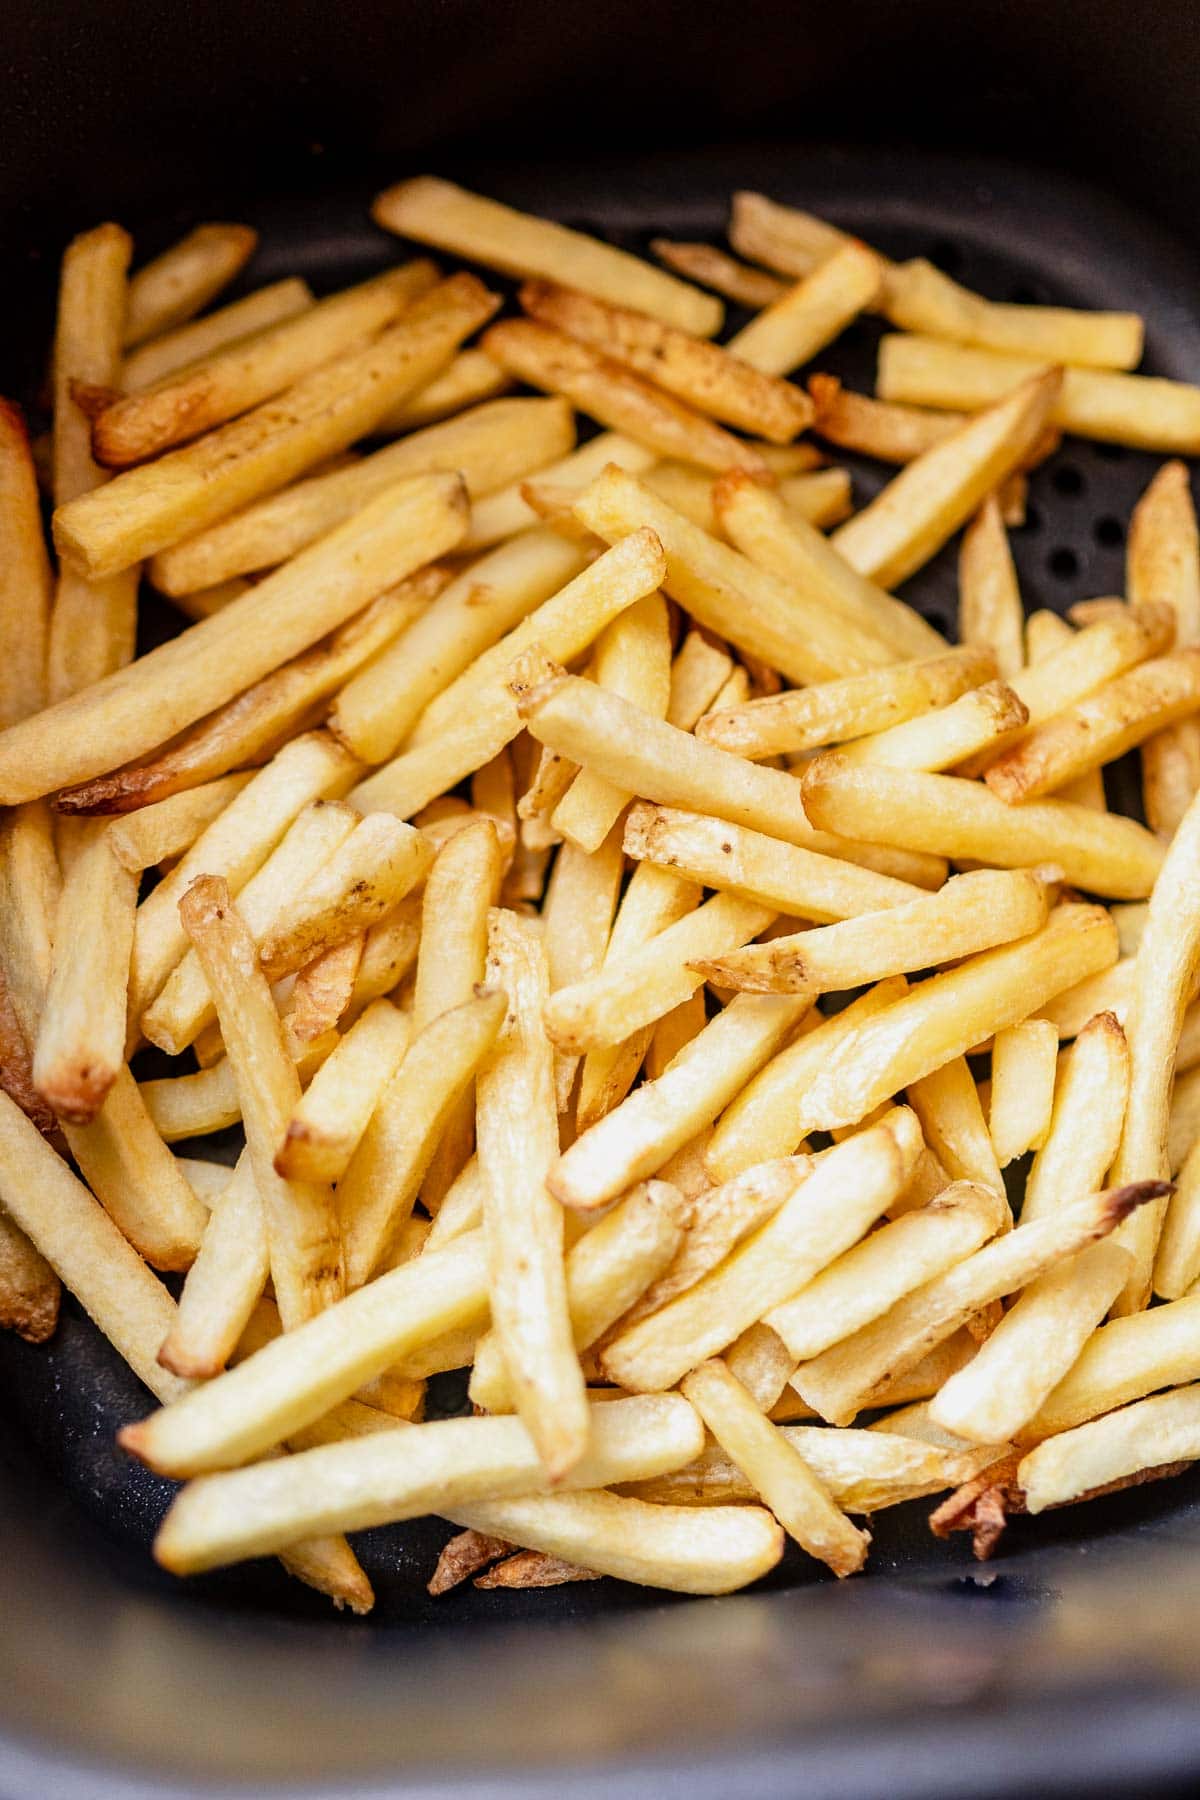 A basket of freshly cooked frozen french fries in an air fryer.